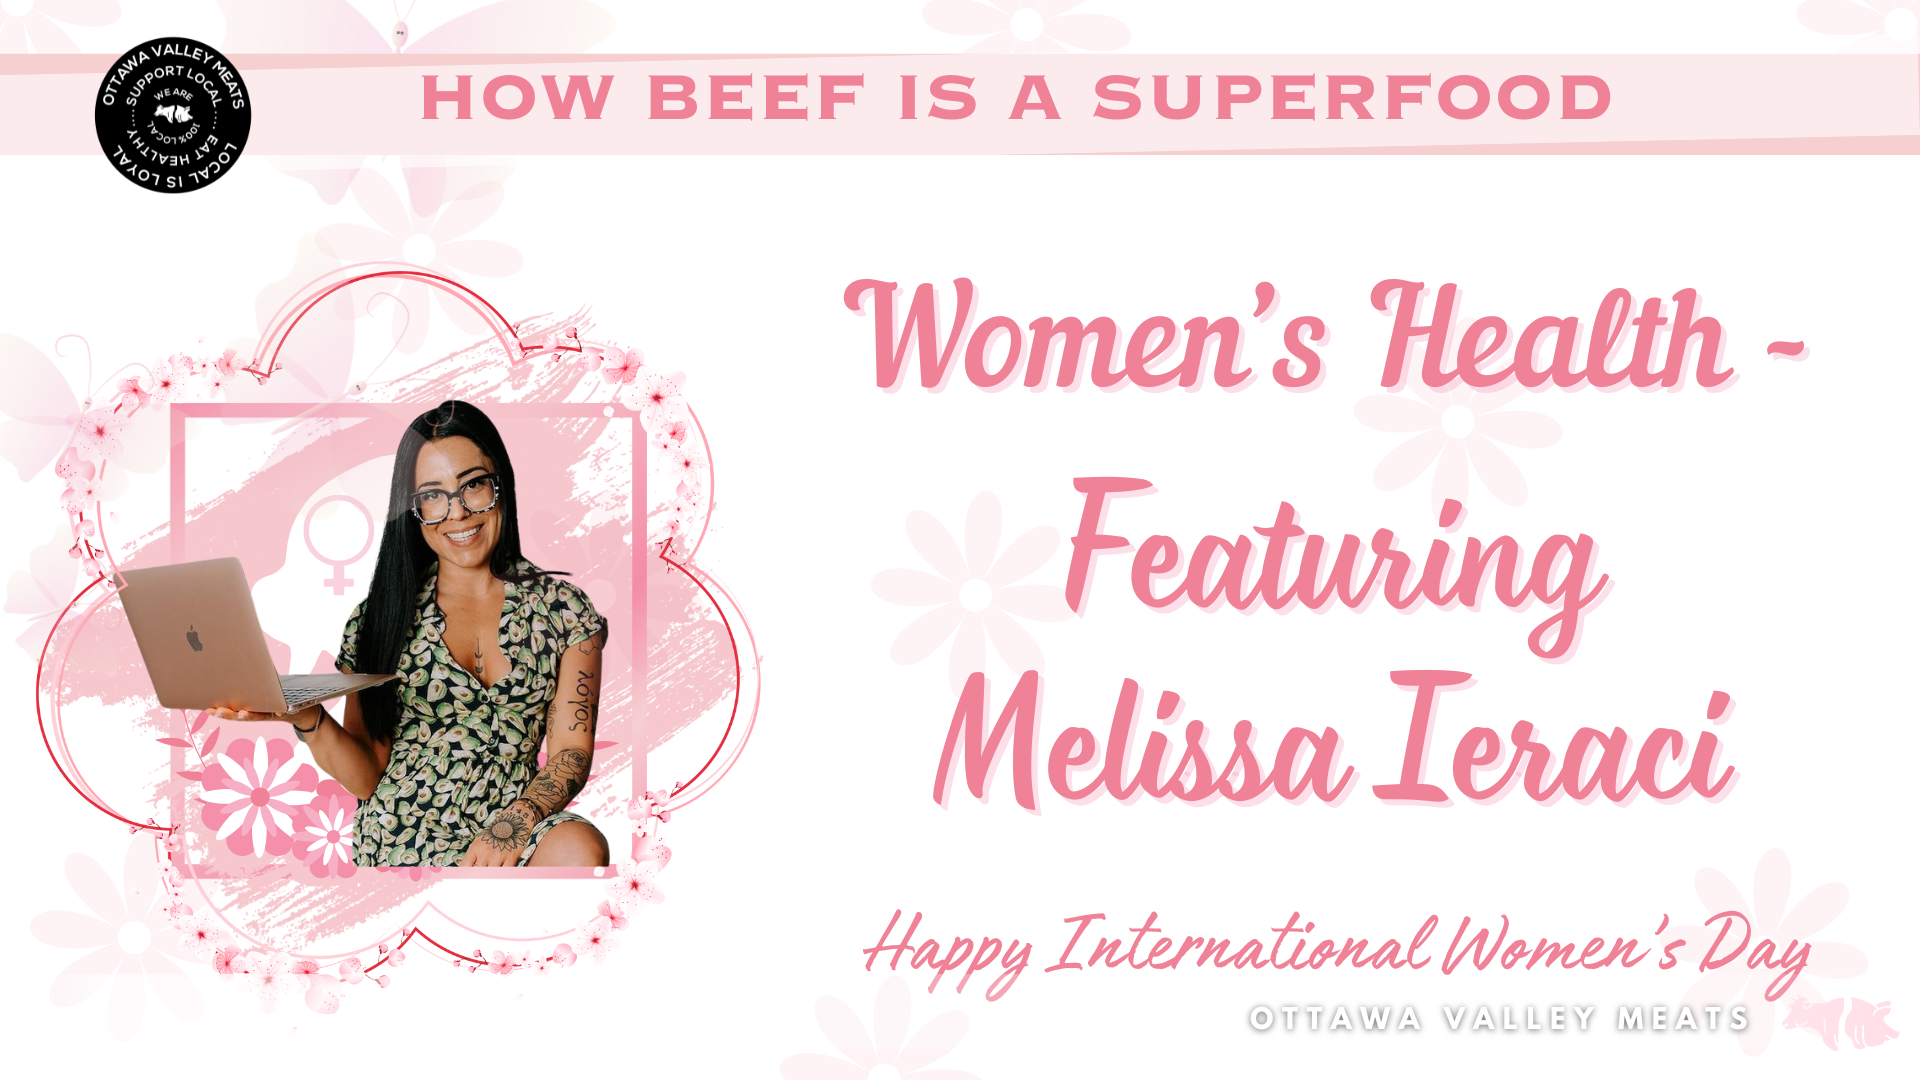 Beef is a Superfood - Women's Health